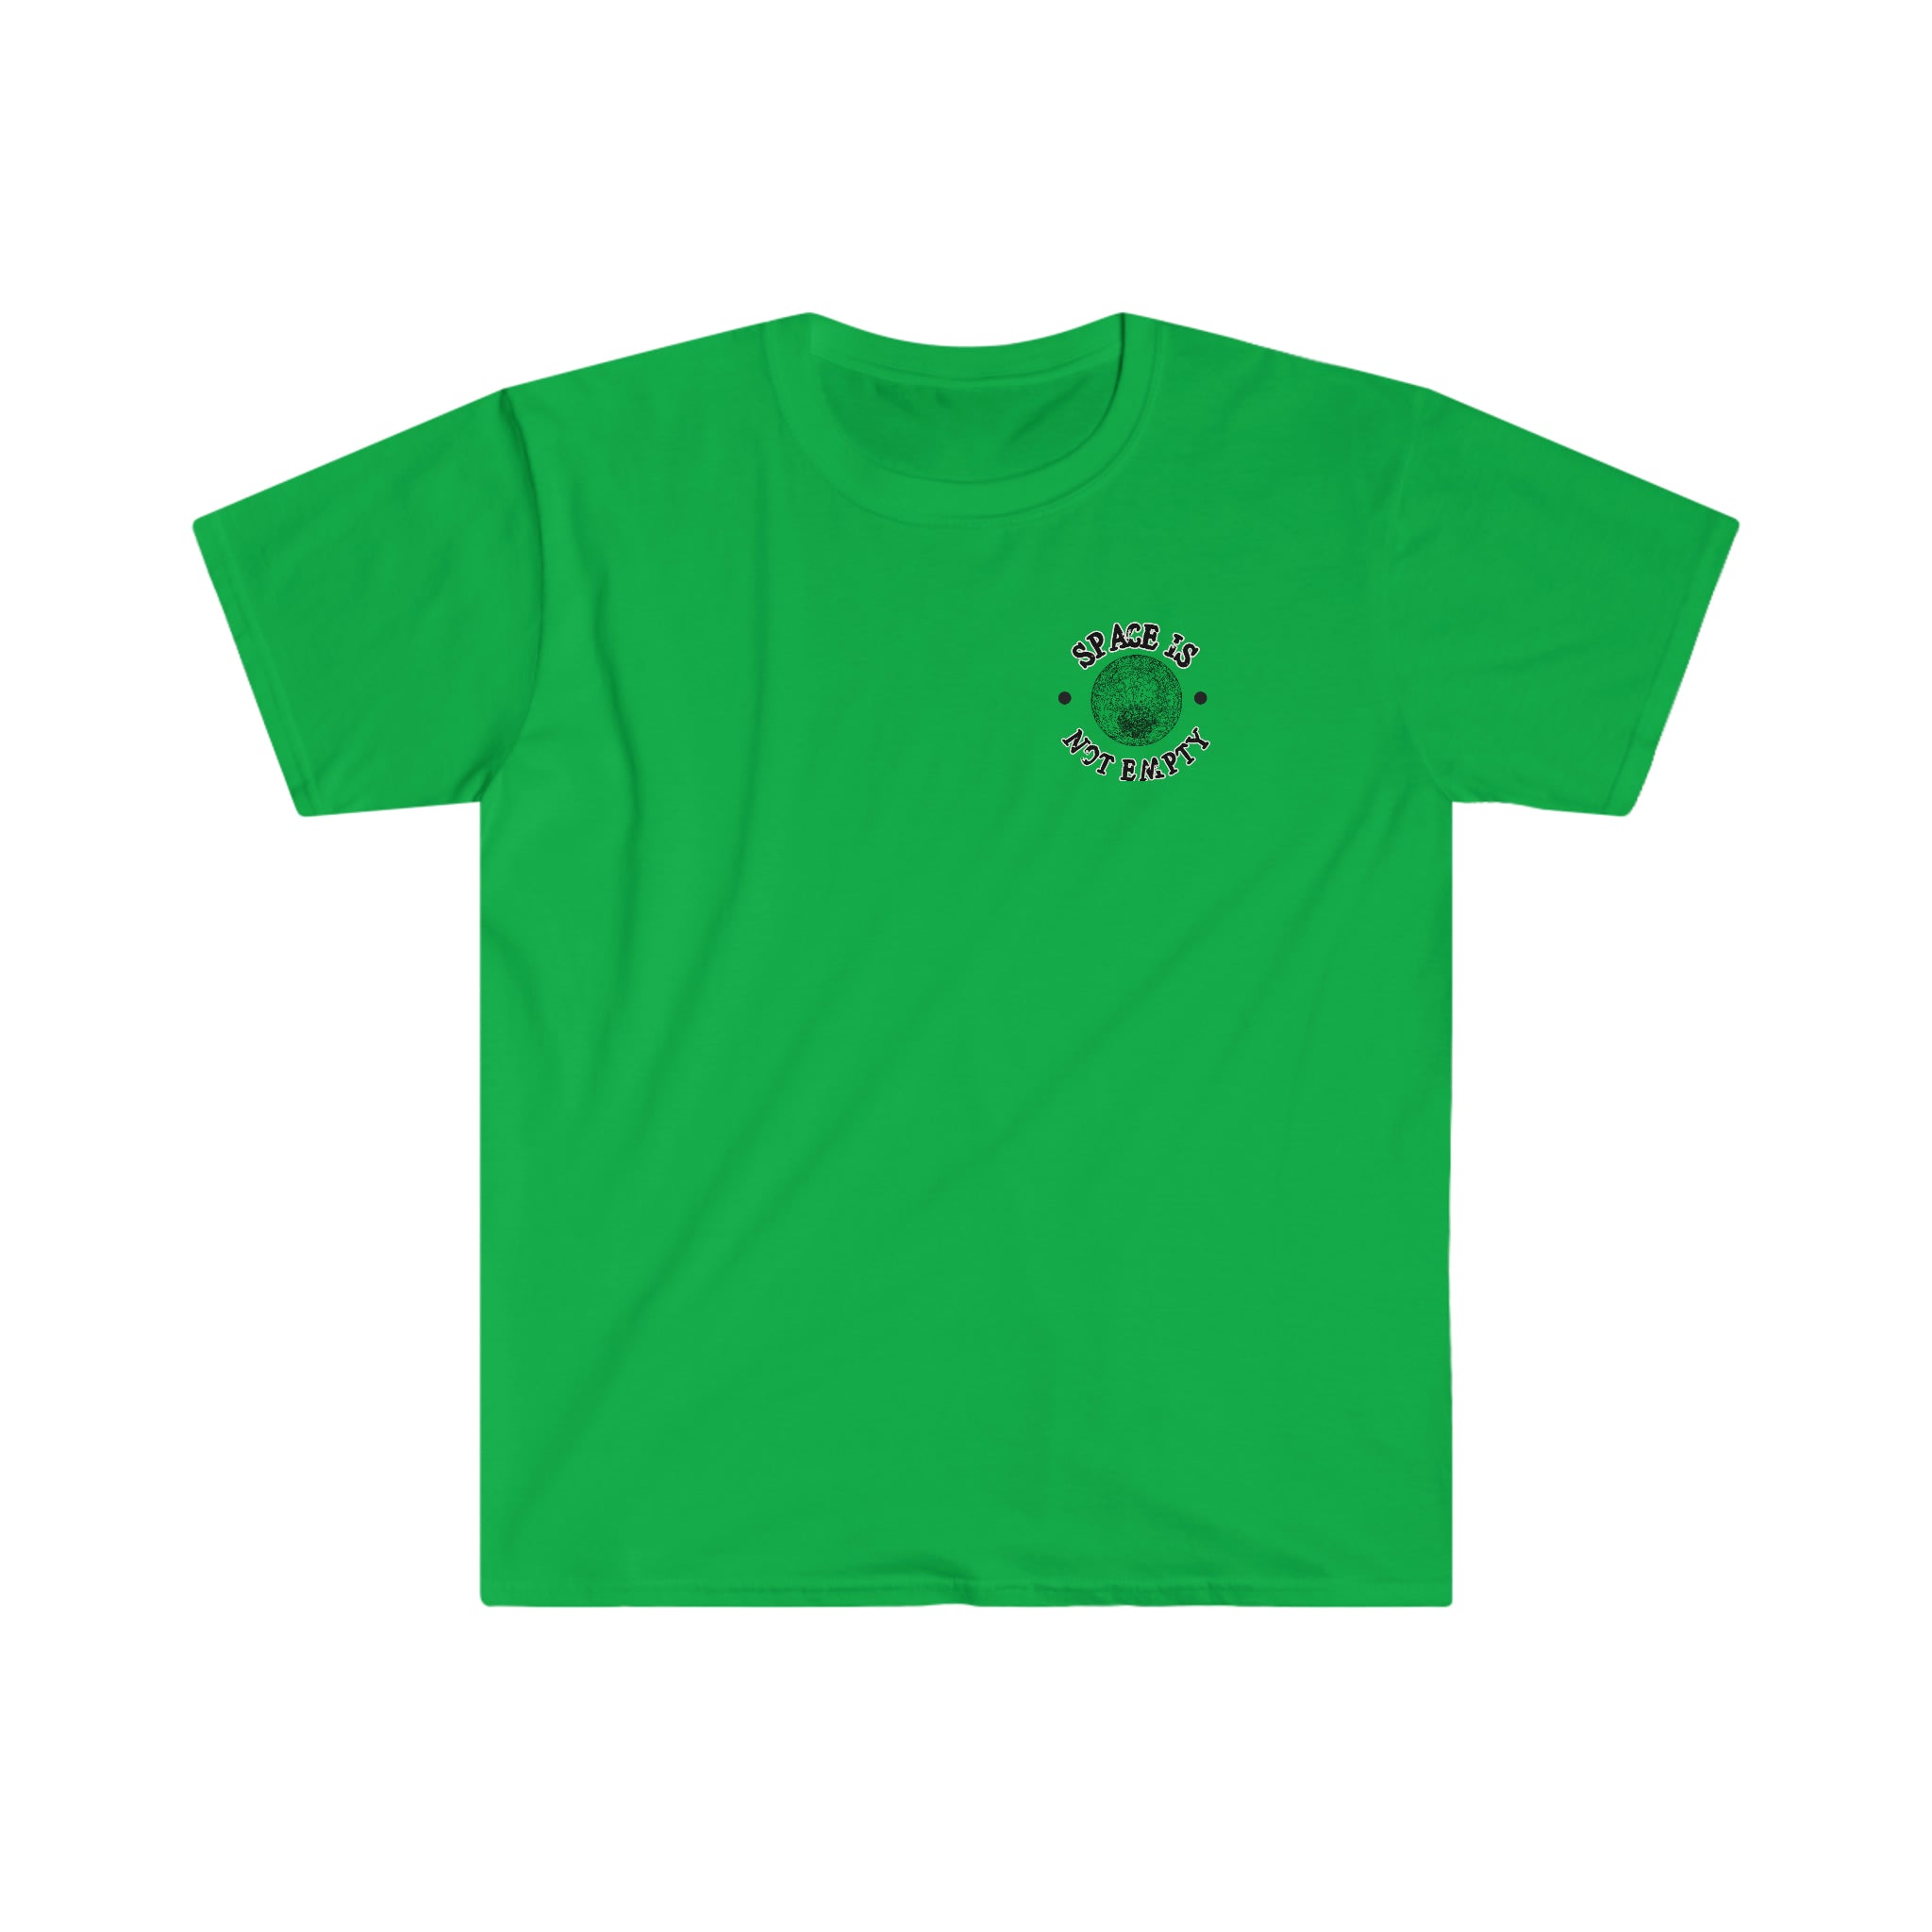 A Space Station T-Shirt with a green flower on it.